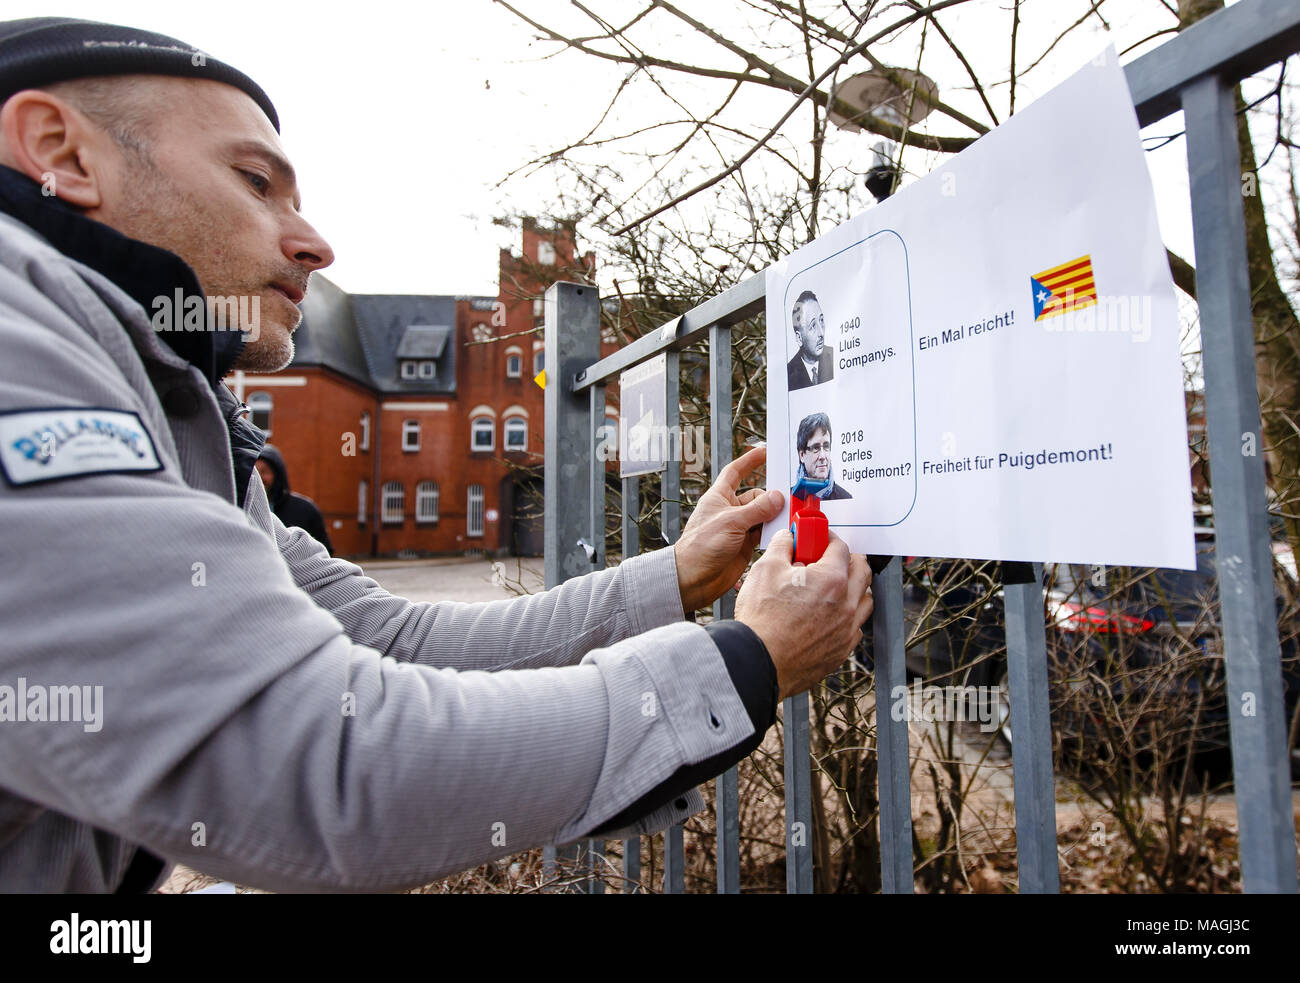 02 April 2018, Germany, Neumuenster:The German-Catalan Jorge Ponsetti hangs up a paper with pictures of Lluis Companys and Carles Puigdemont outside the Neumuenster prison. Companys was on the run as President of the Catalan Republic in 1939 in France, was arrested by the Gestapo and extradited to Spain in 1940. The former President of Catalonia Puigdemont is held in custody since his arrest on 25 March 2018 at the Neumuenster prison. Photo: Frank Molter/dpa Stock Photo